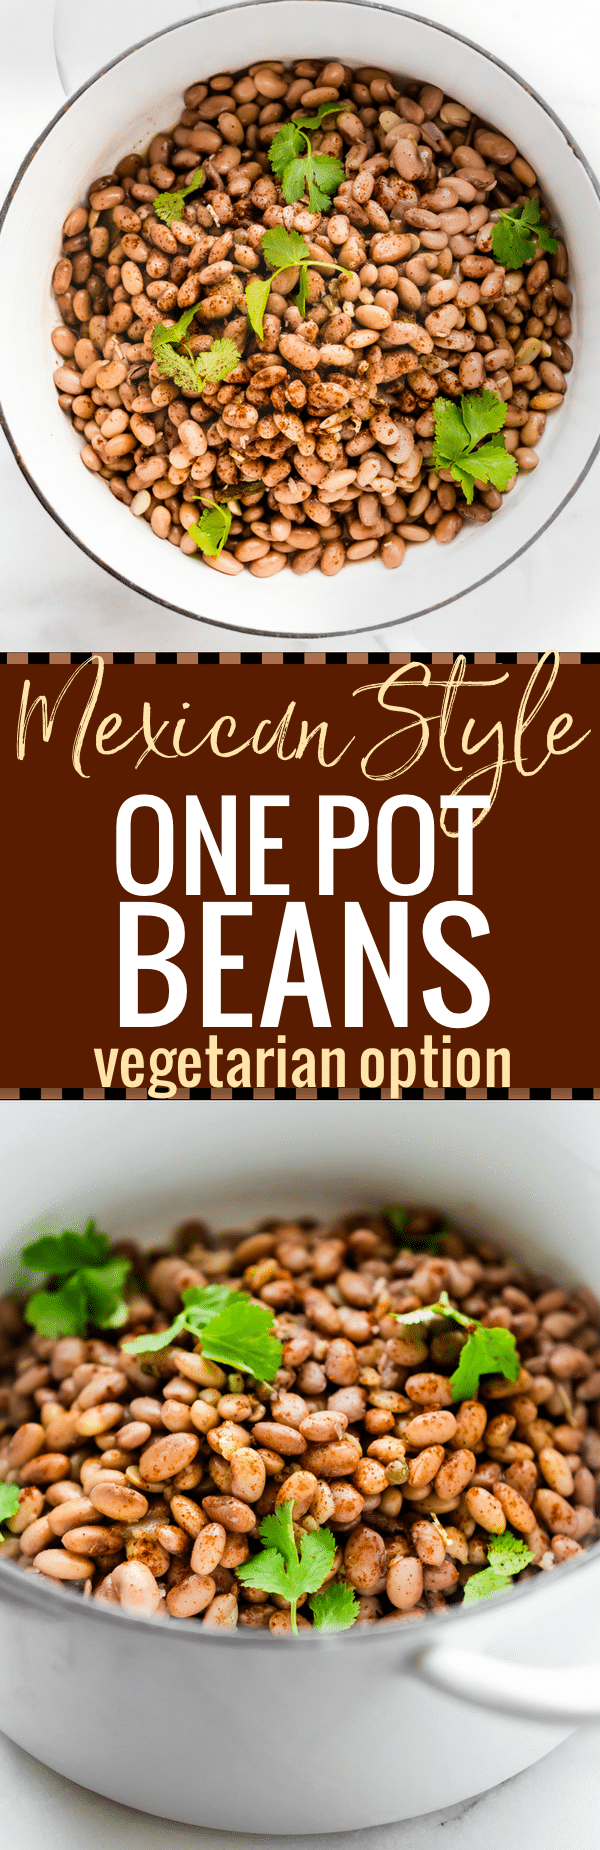 How to make Mexican Style One Pot Beans . This Mexican Pinto Beans recipe is slow cooked with Mexican spices and vegetables! Vegetarian option, healthy, and gluten free! An Easy to follow one pot recipe